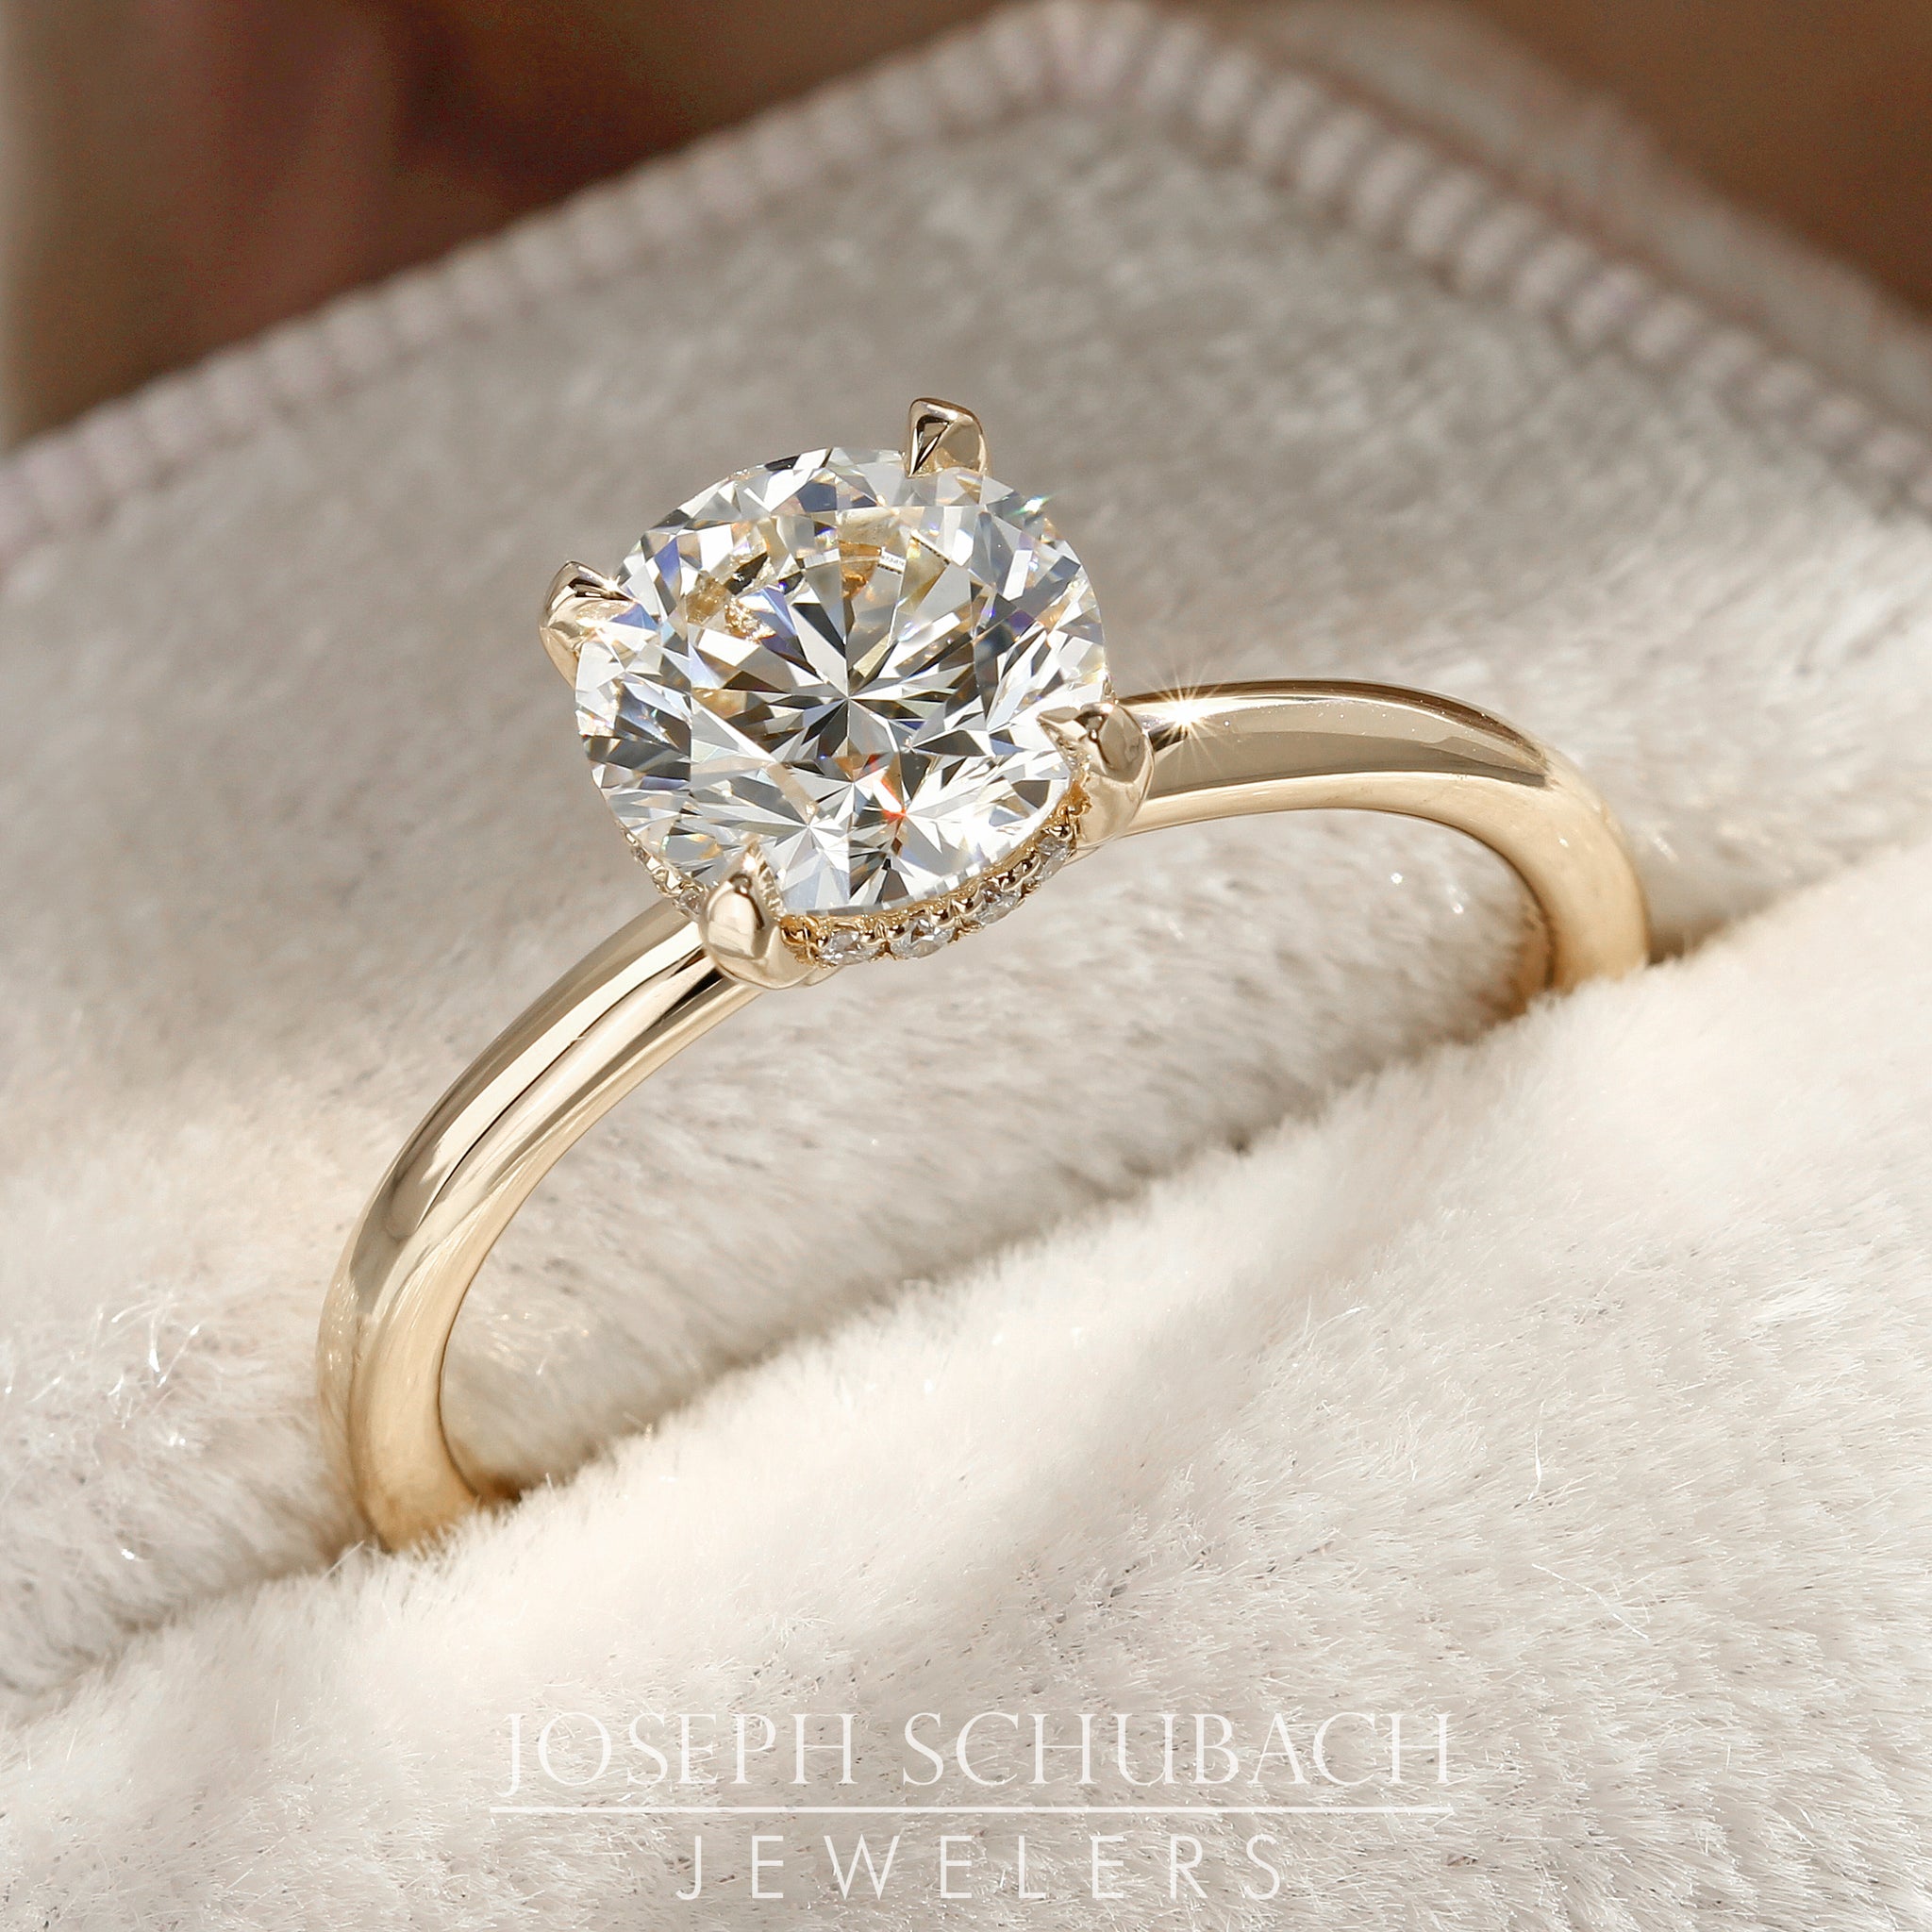 Round Duchess Engagement Ring with Petite Pavé Under Bezel (Style 103343)